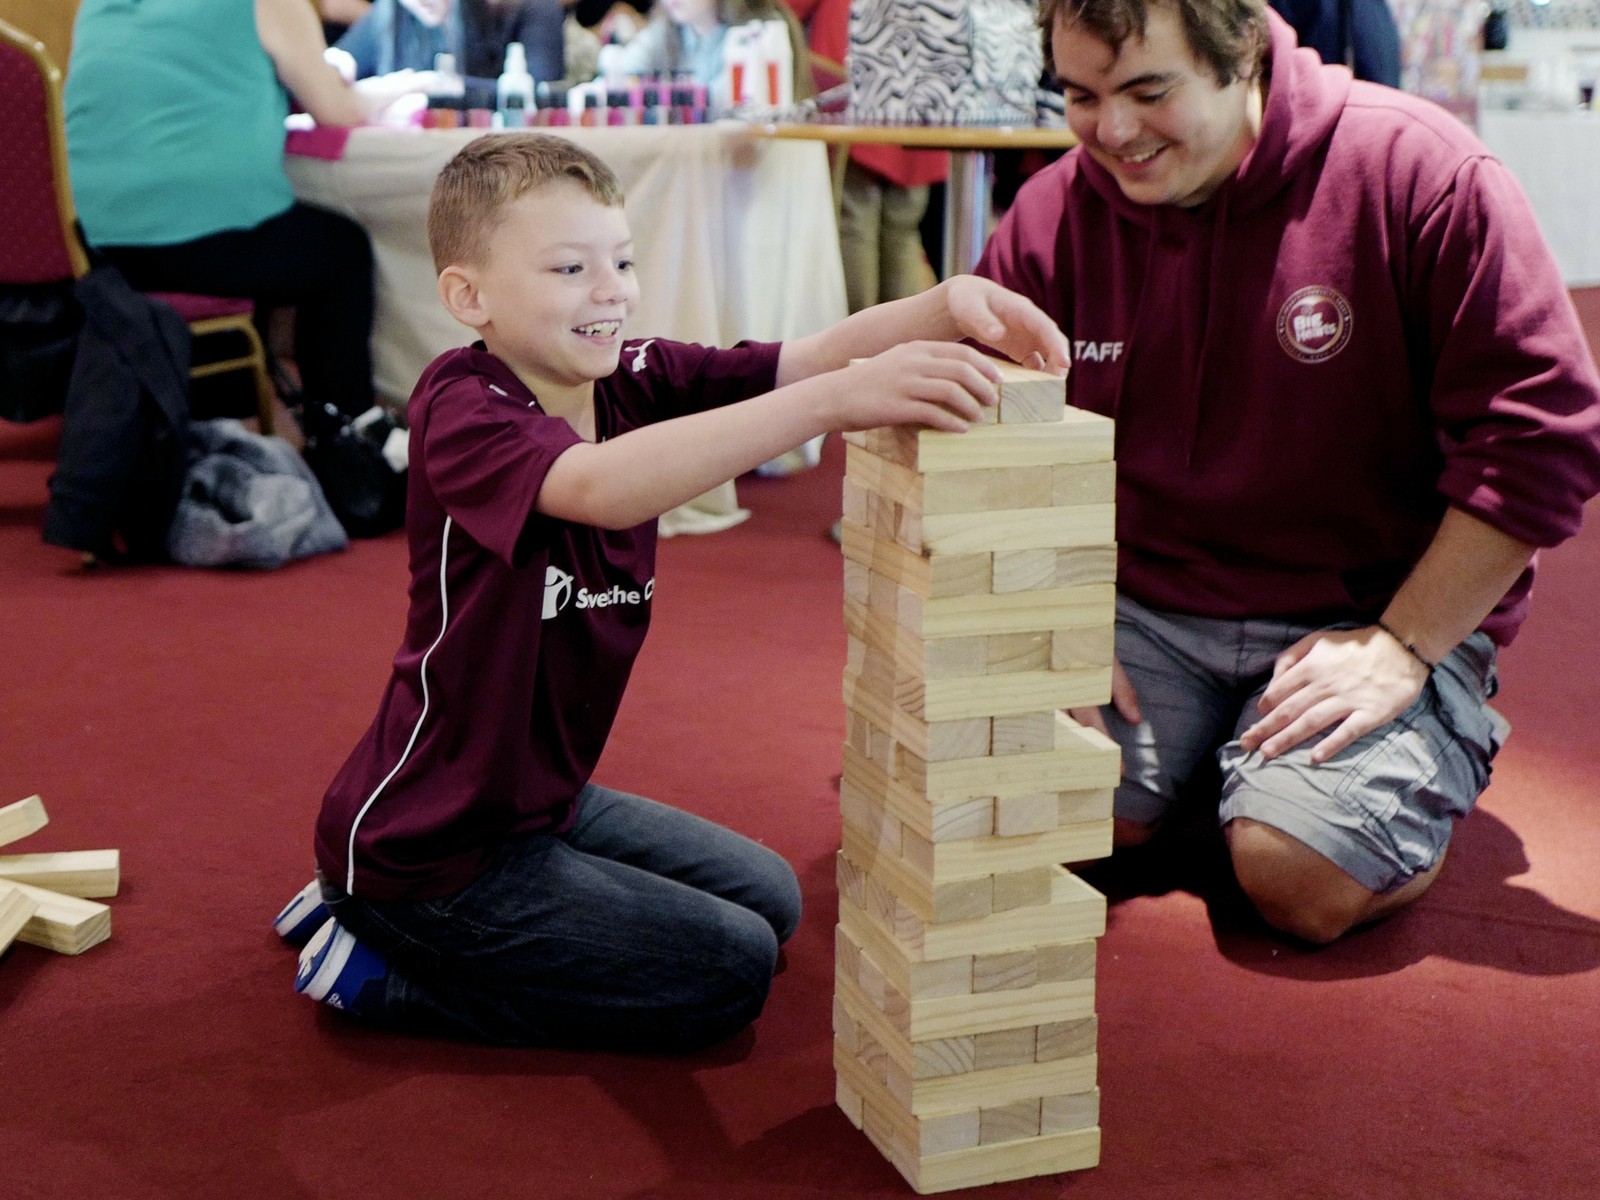  » Over 300 attend Big Hearts Kinship Family Day